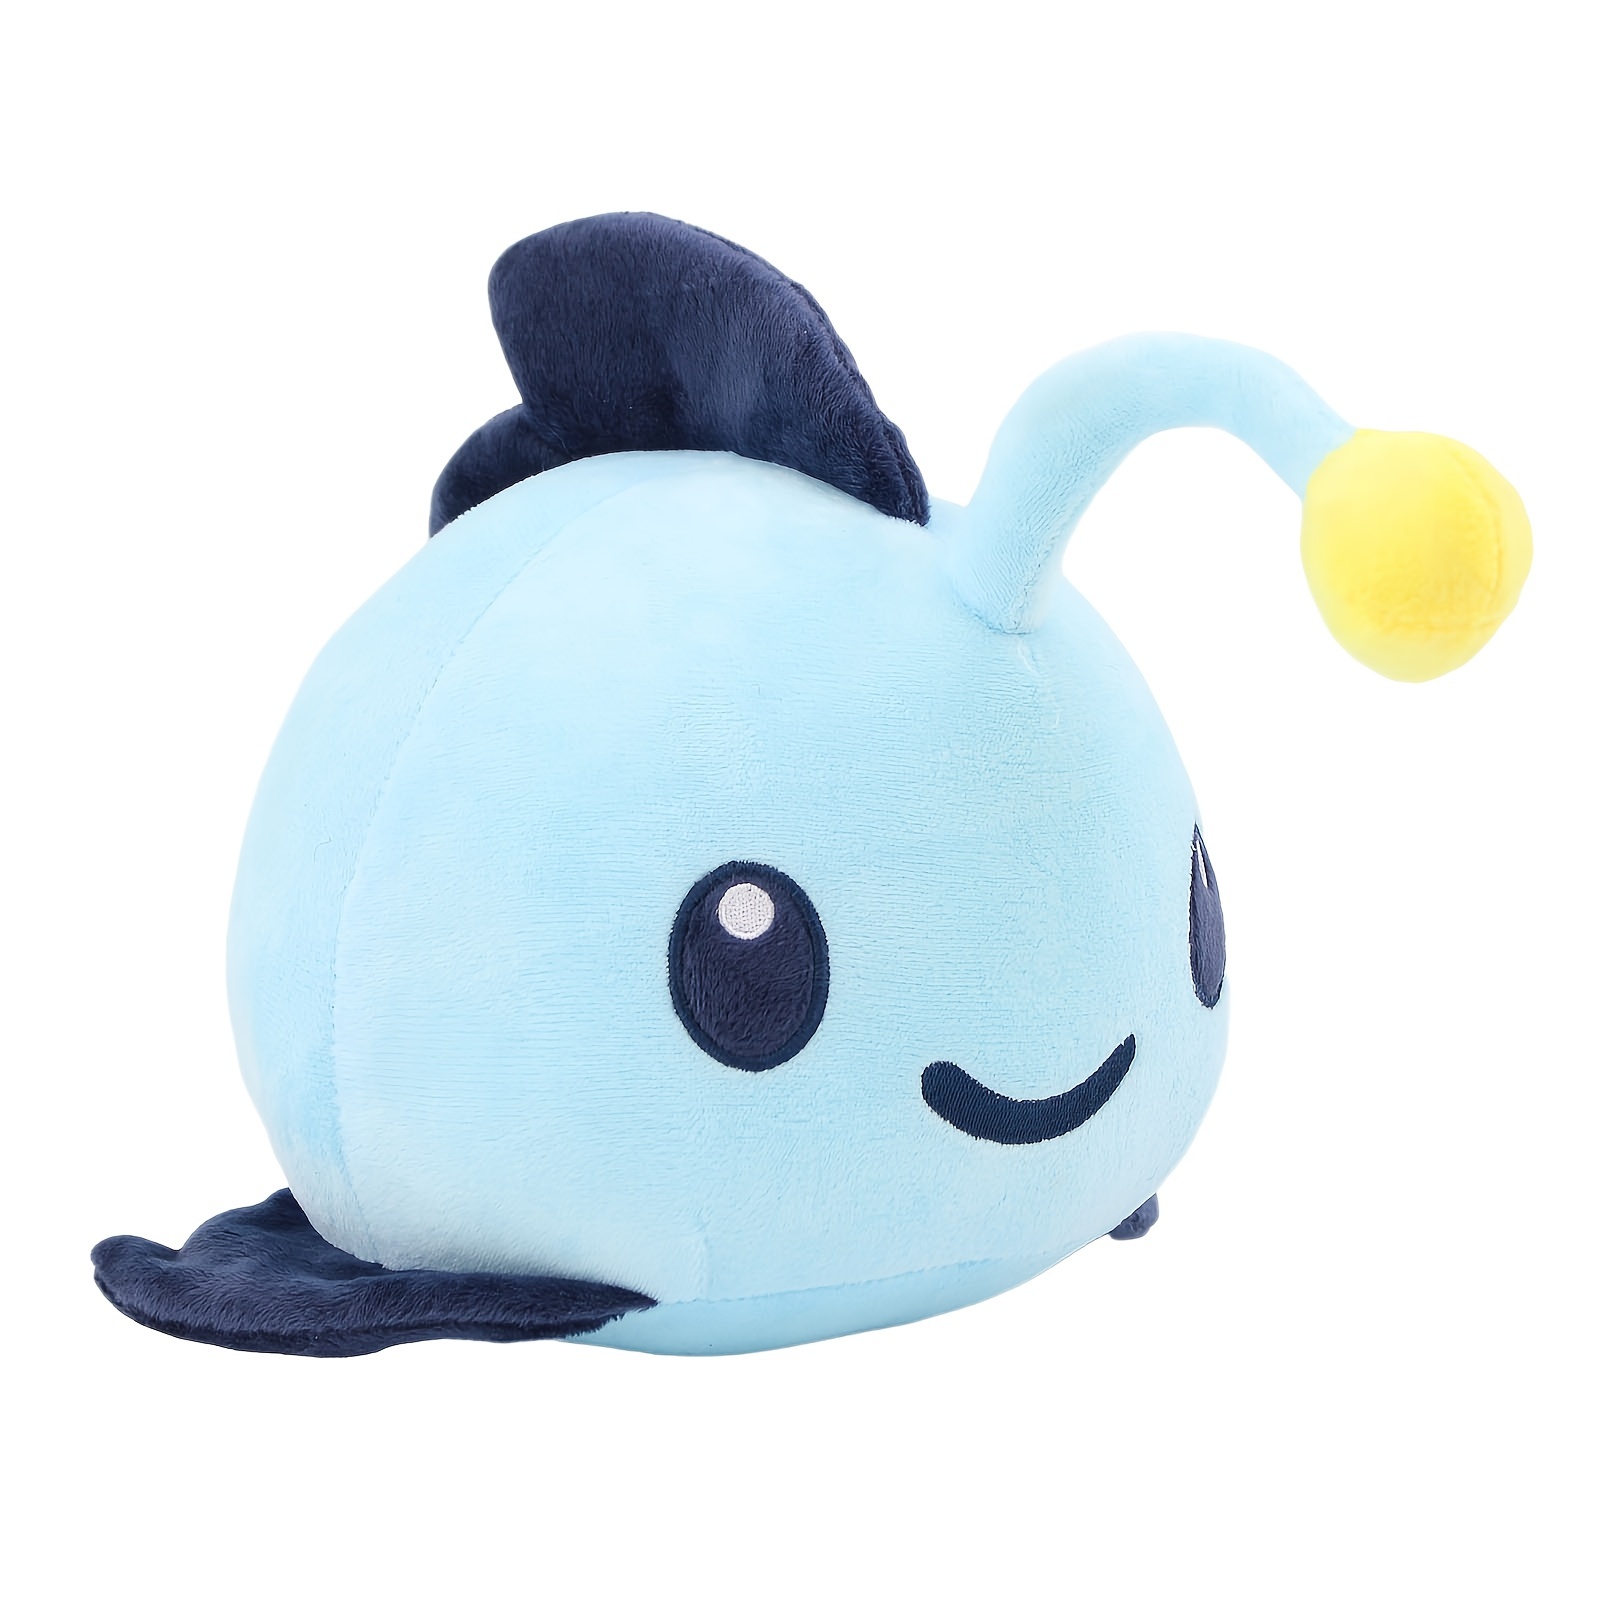 20cm 7 87in Height Cute Slime Rancher Plush Doll for Christmas Gifts